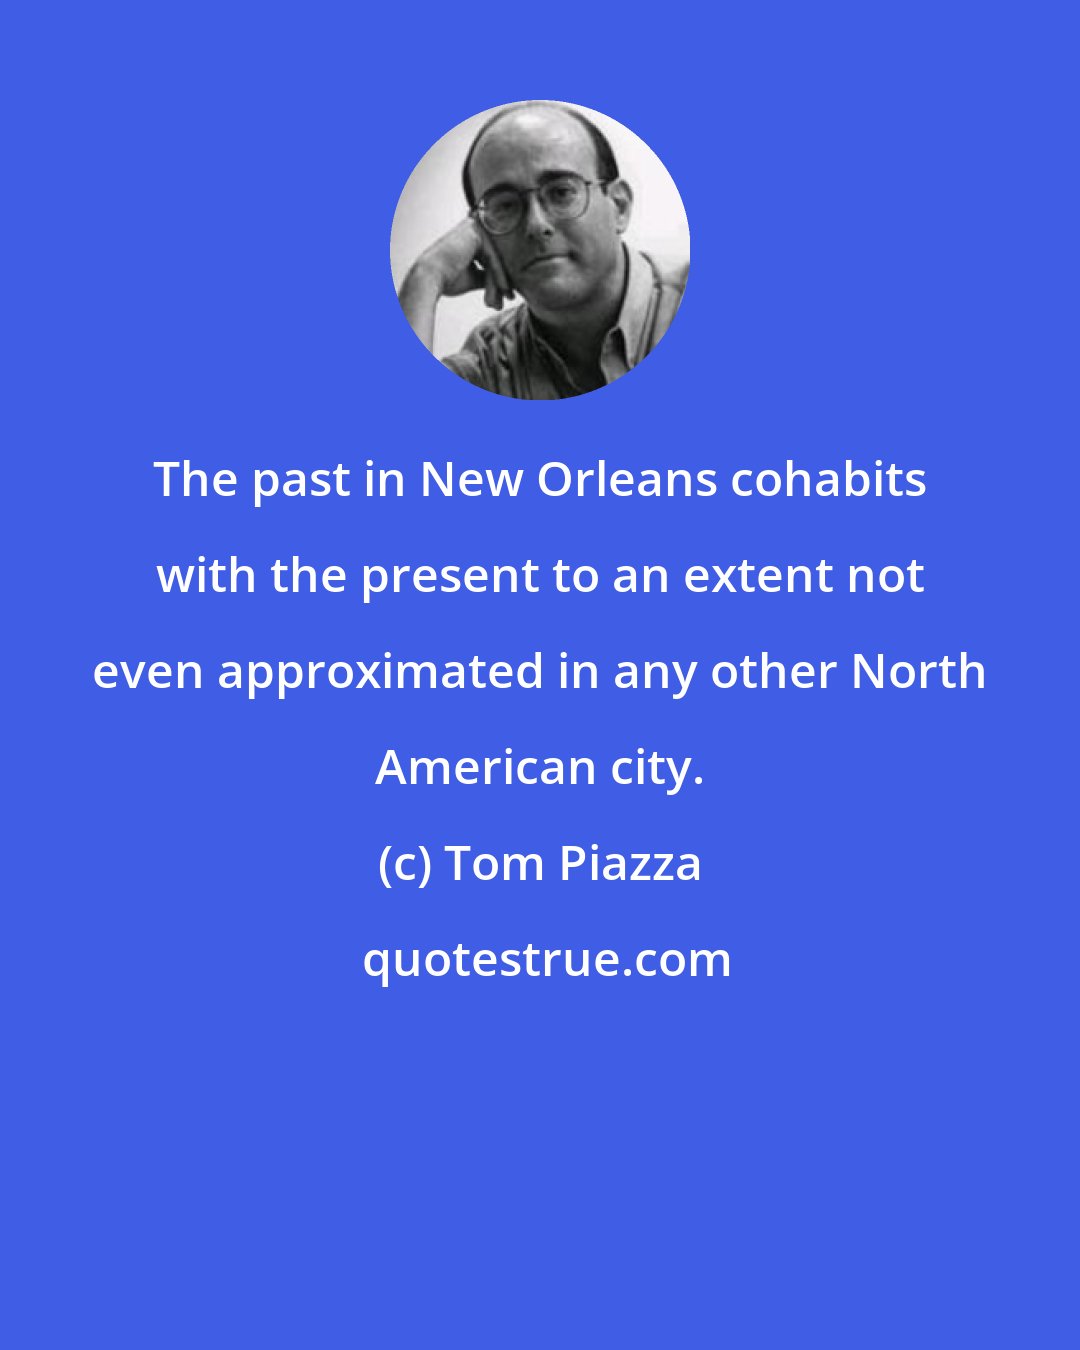 Tom Piazza: The past in New Orleans cohabits with the present to an extent not even approximated in any other North American city.